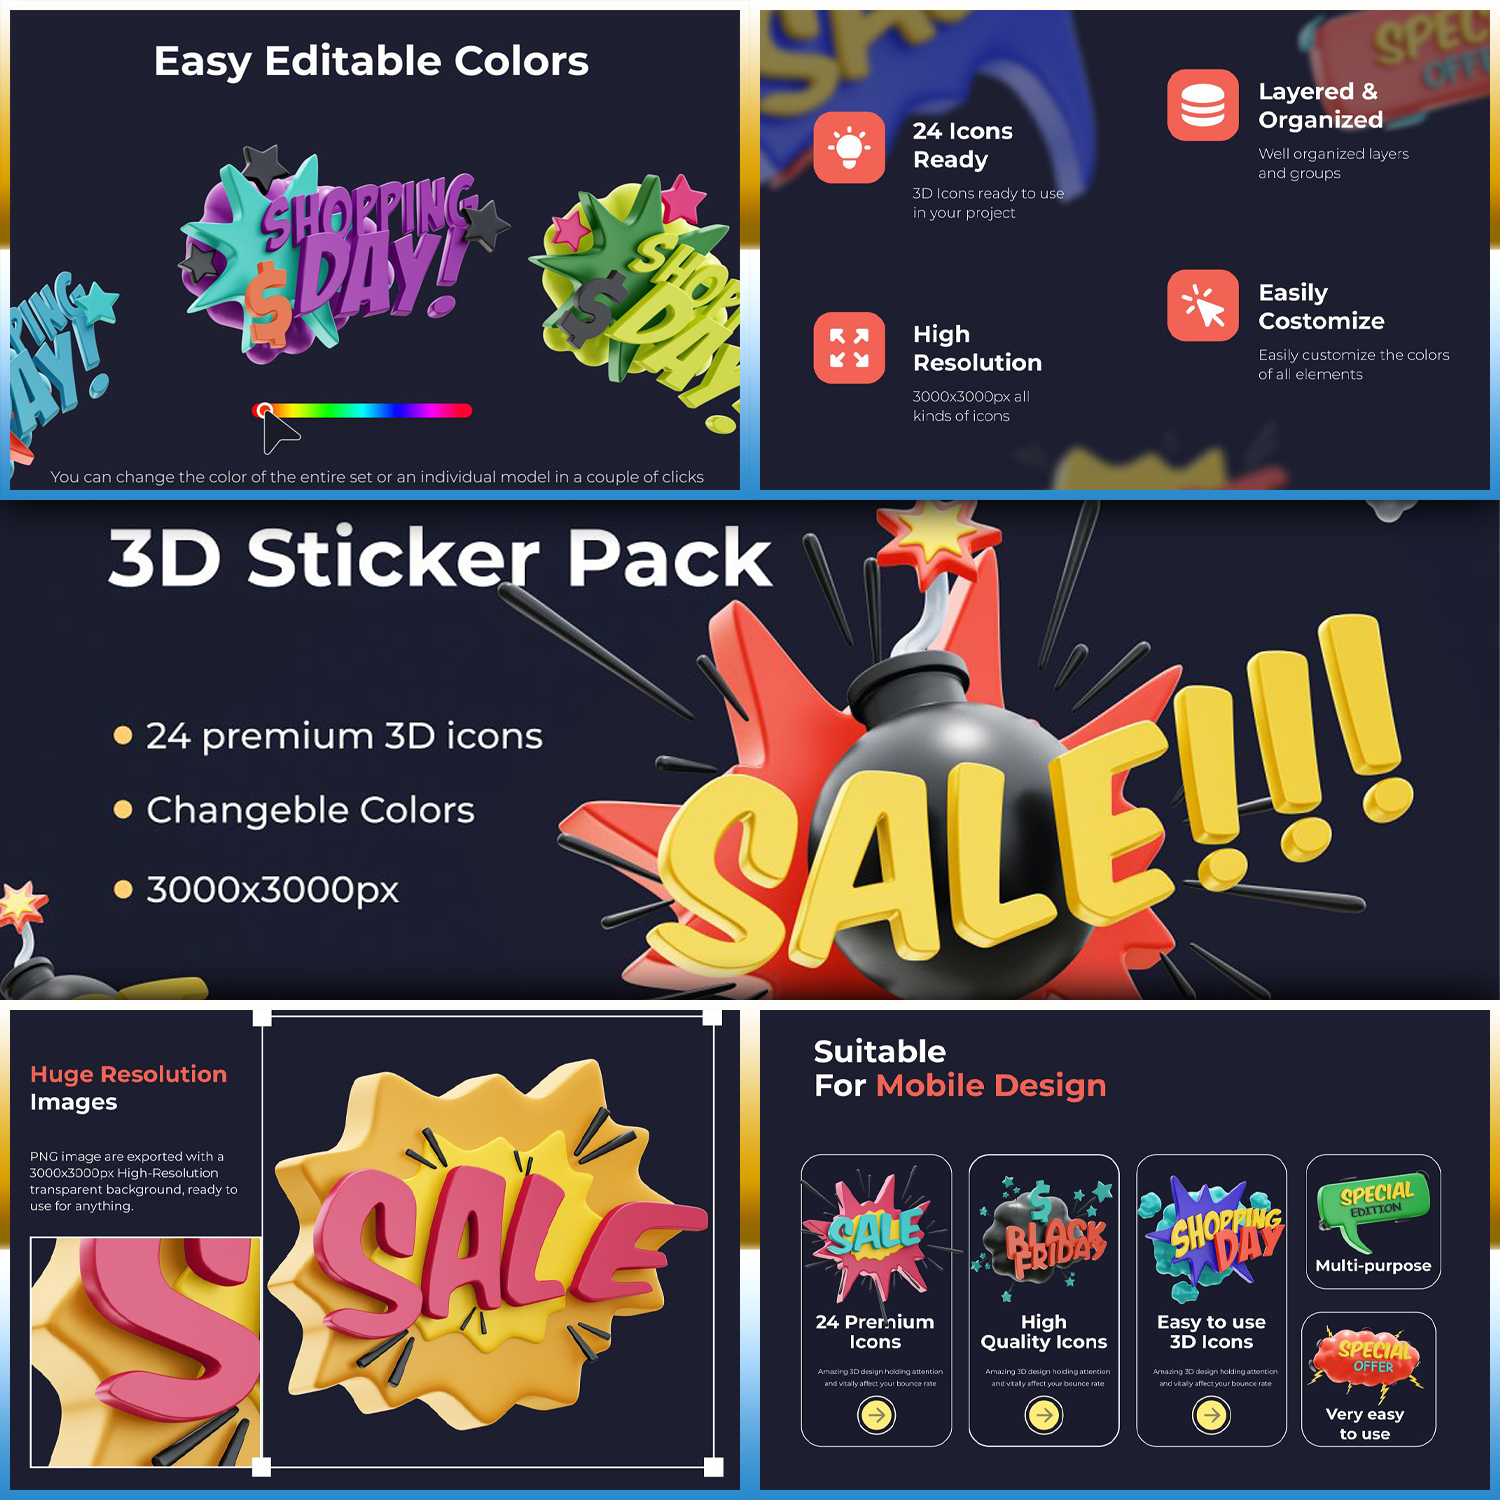 Images with 3d sticker pack.